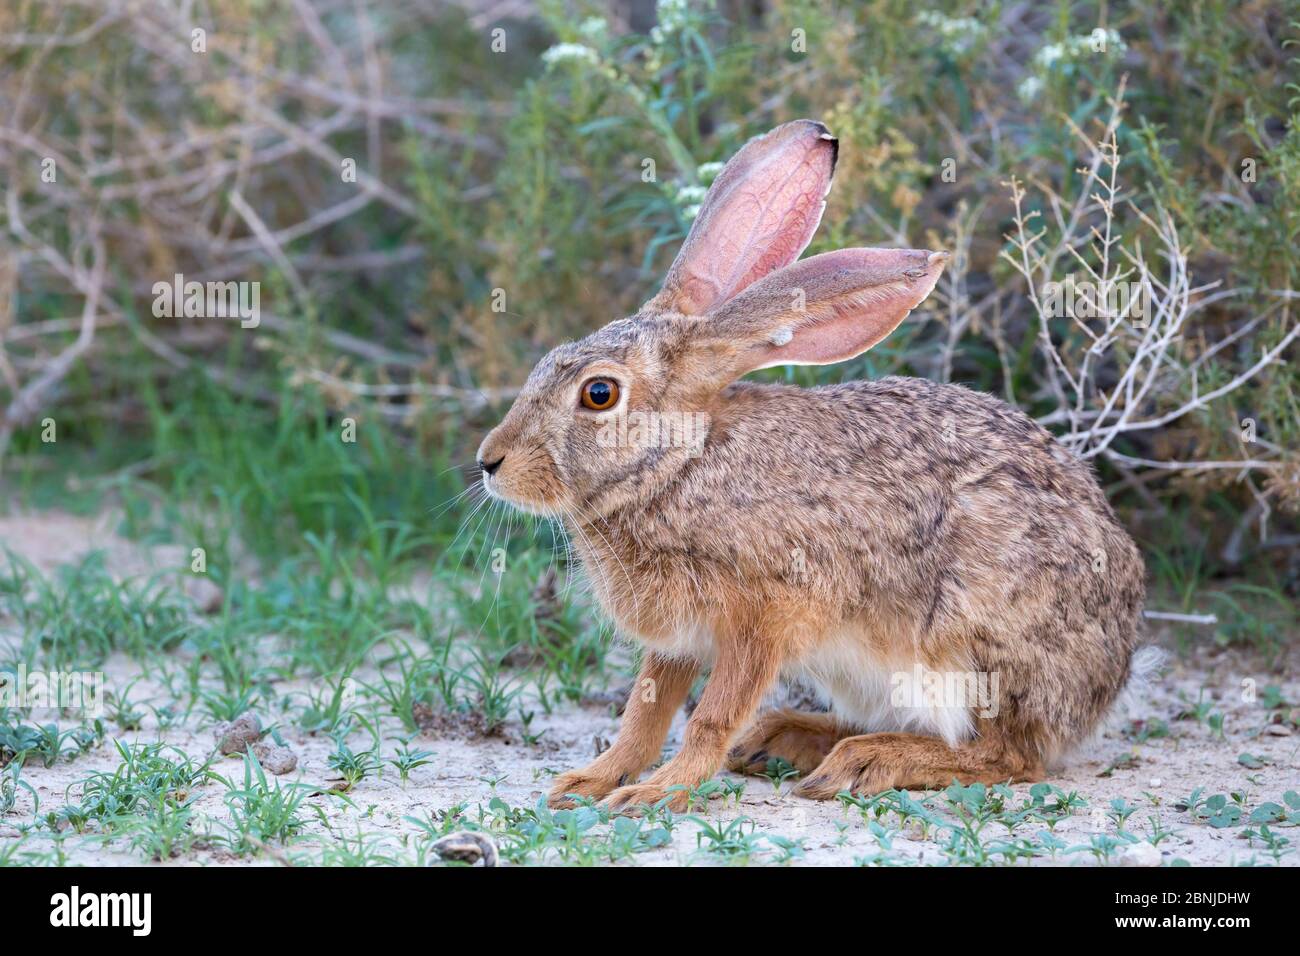 Cape hare (Lepus capensis) Kgalagadi Transfrontier Park, Northern Cape, South Africa Stock Photo